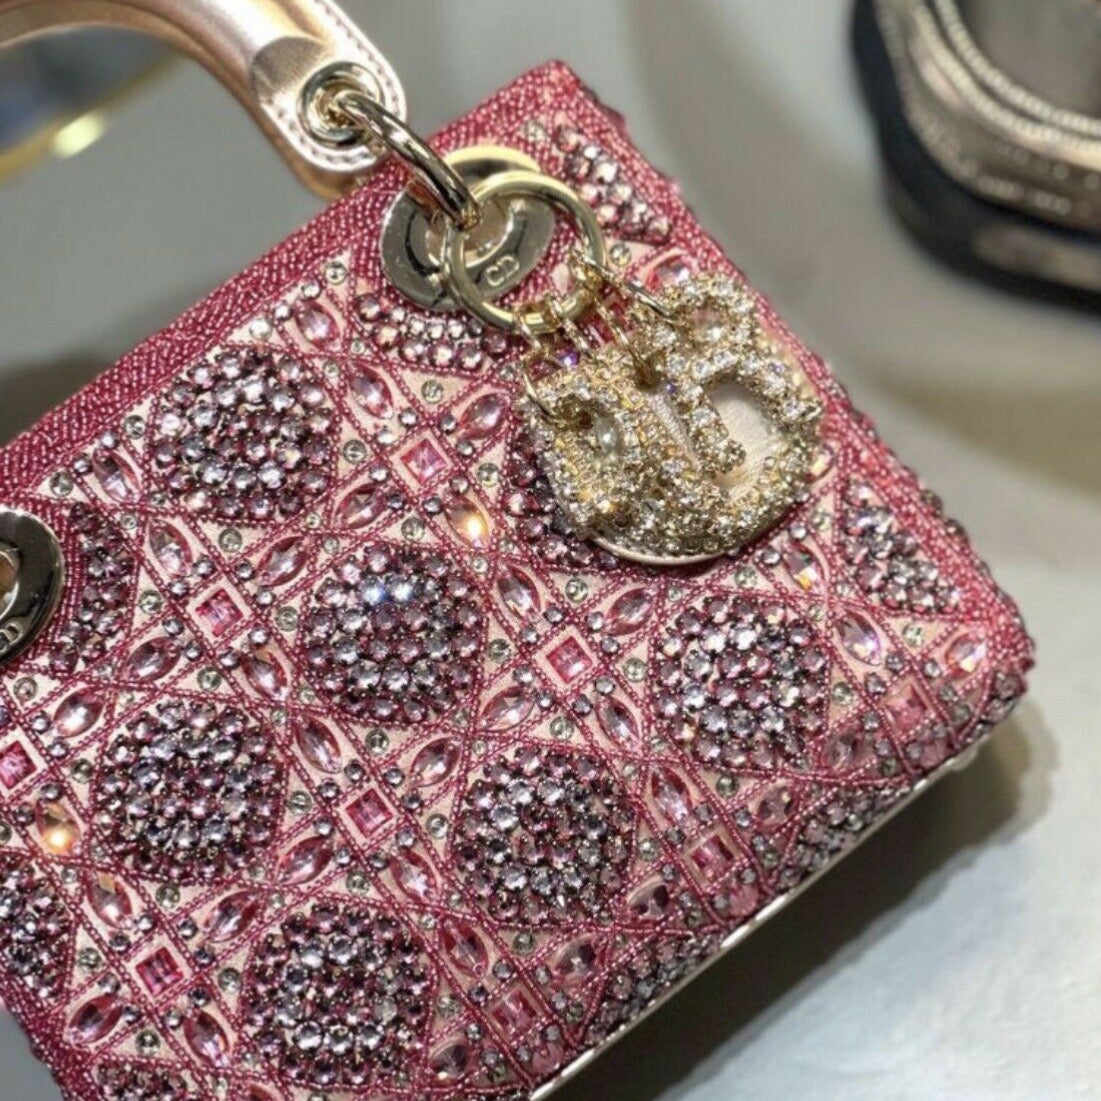 LADY DIOR MINIMetallic Calfskin and Satin with Rose Des Vents Pearl Em –  AuthenticFab